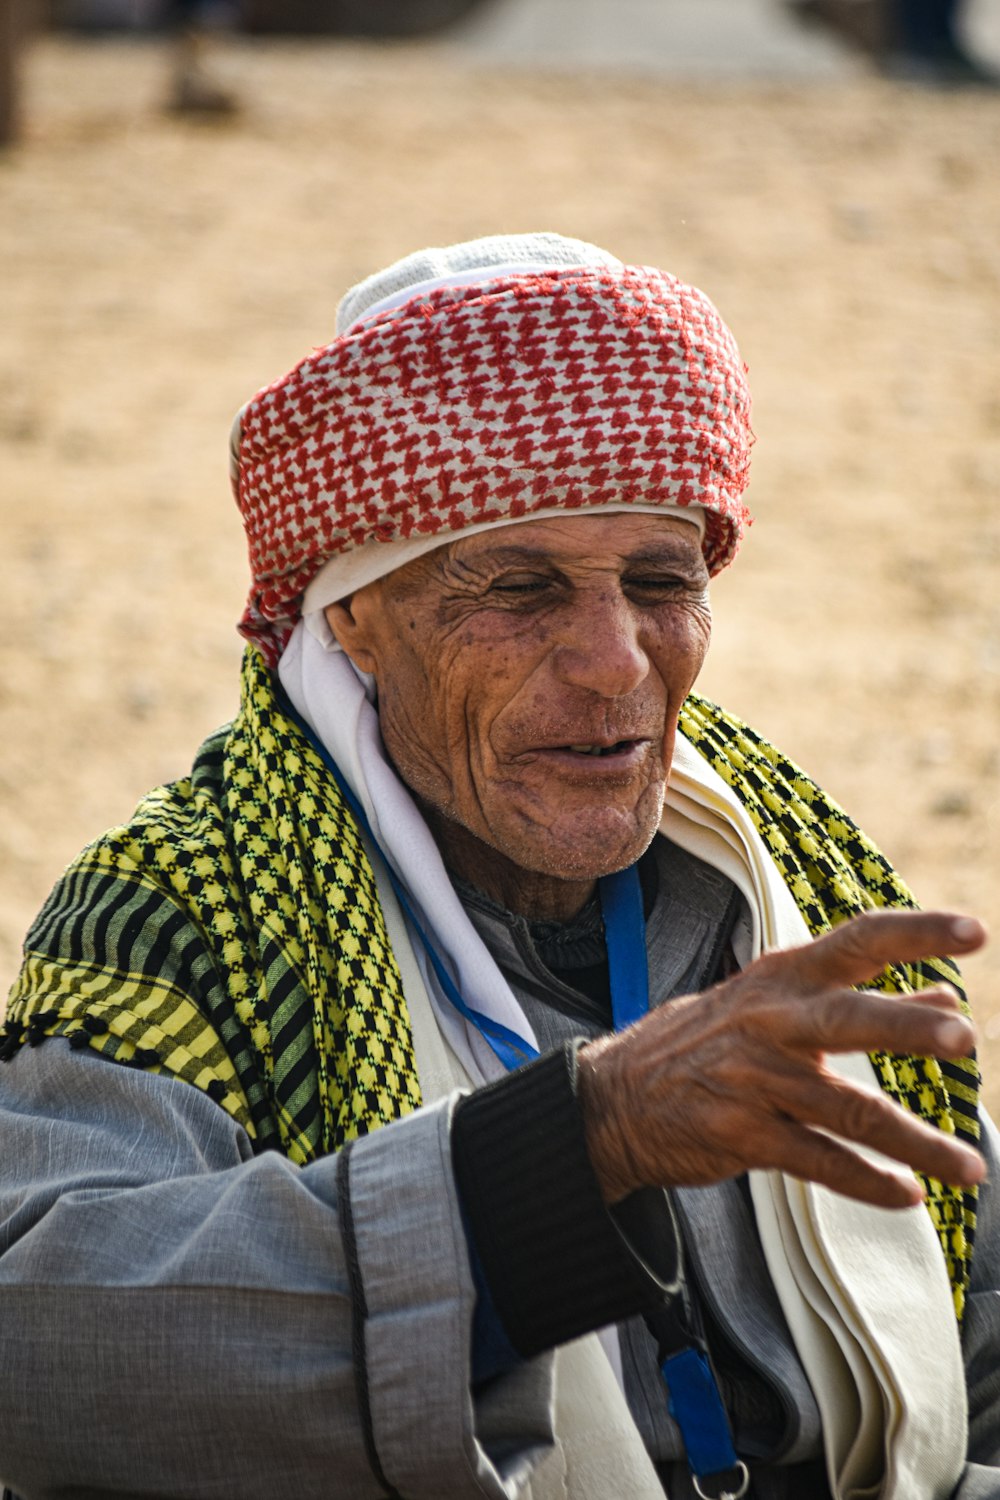 an old man wearing a colorful hat and scarf